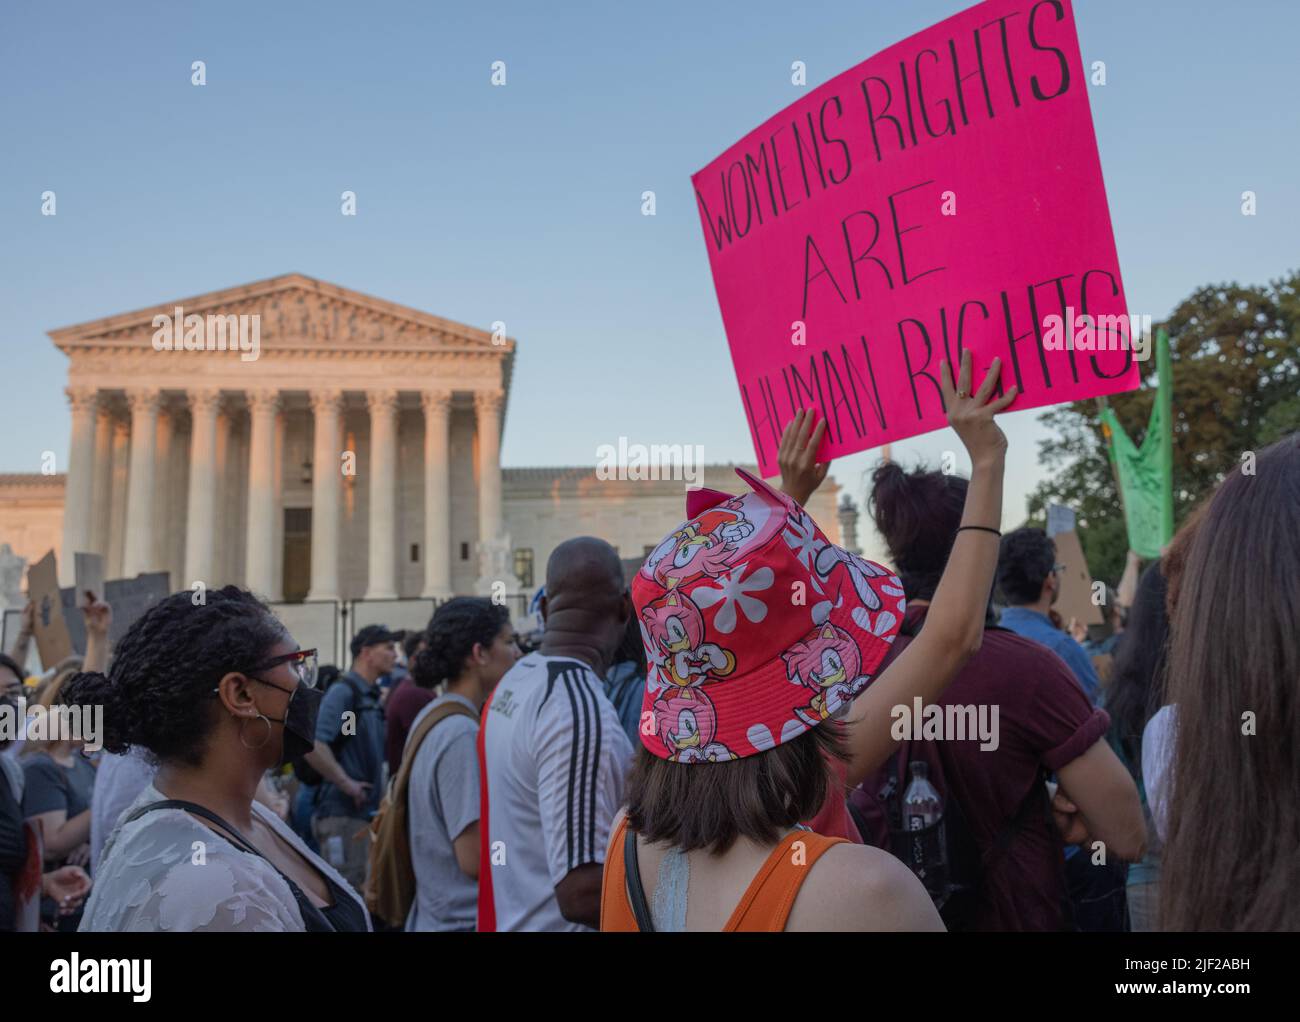 WASHINGTON, D.C. – June 24, 2022: Abortion rights demonstrators rally near the Supreme Court of the United States. Stock Photo